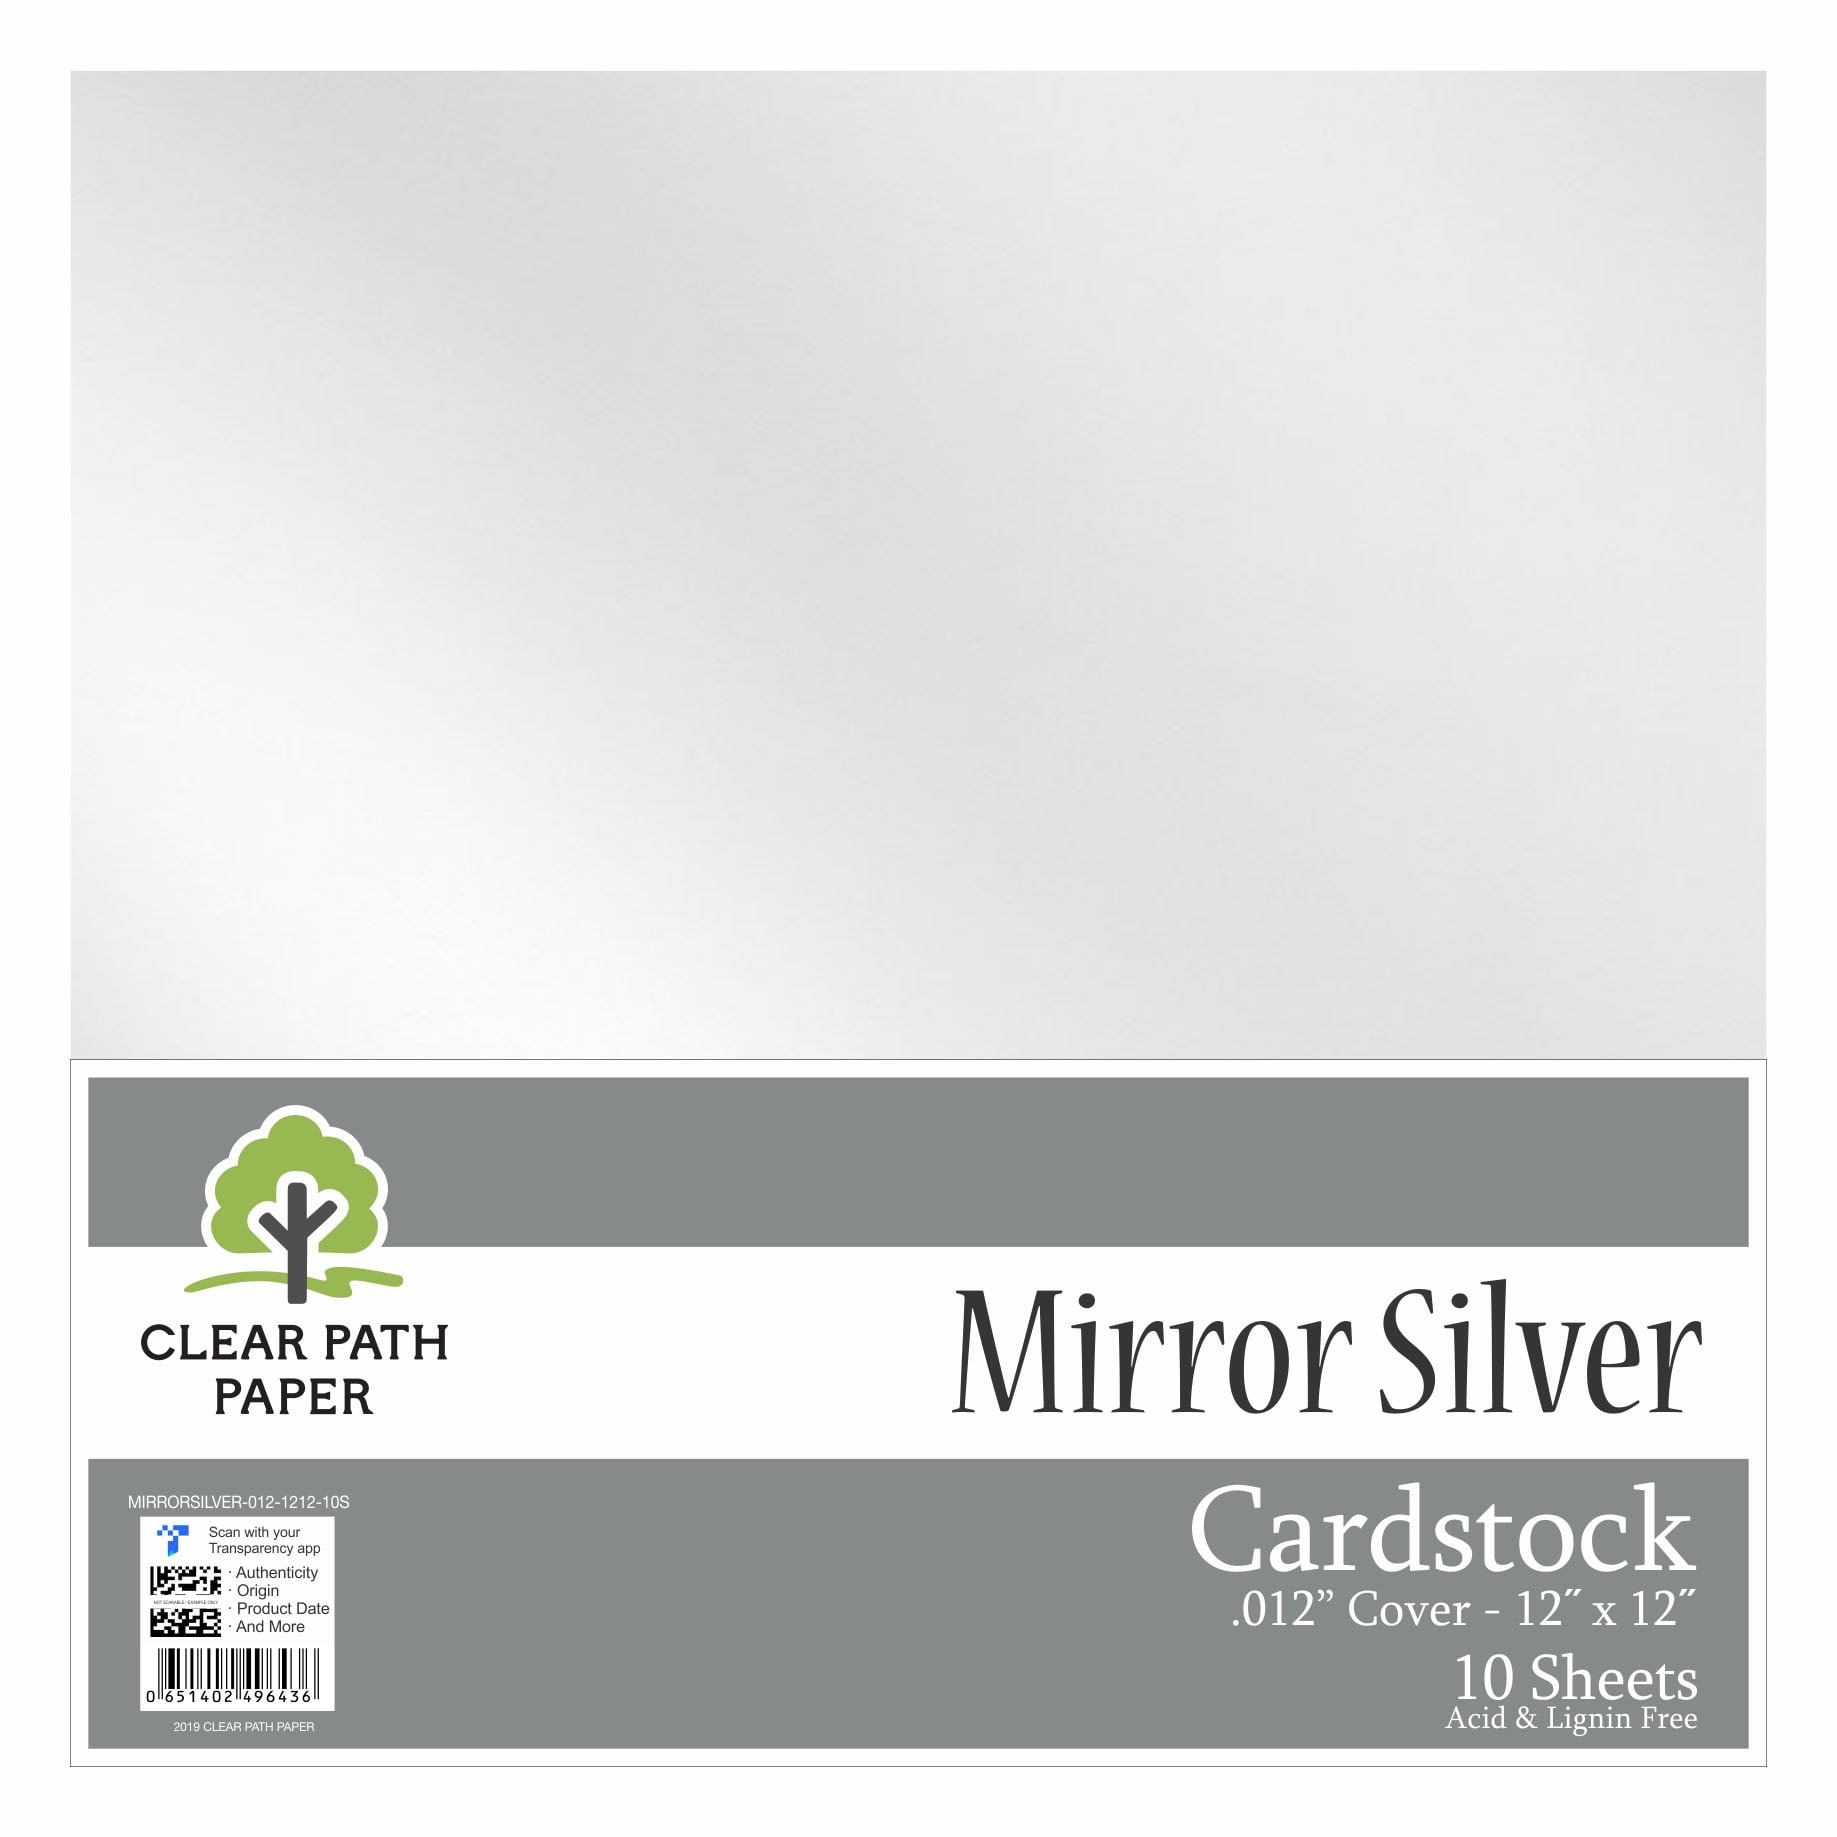 Black Cardstock - 8.5 x 11 inch - 65Lb Cover - 50 Sheets - Clear Path Paper  